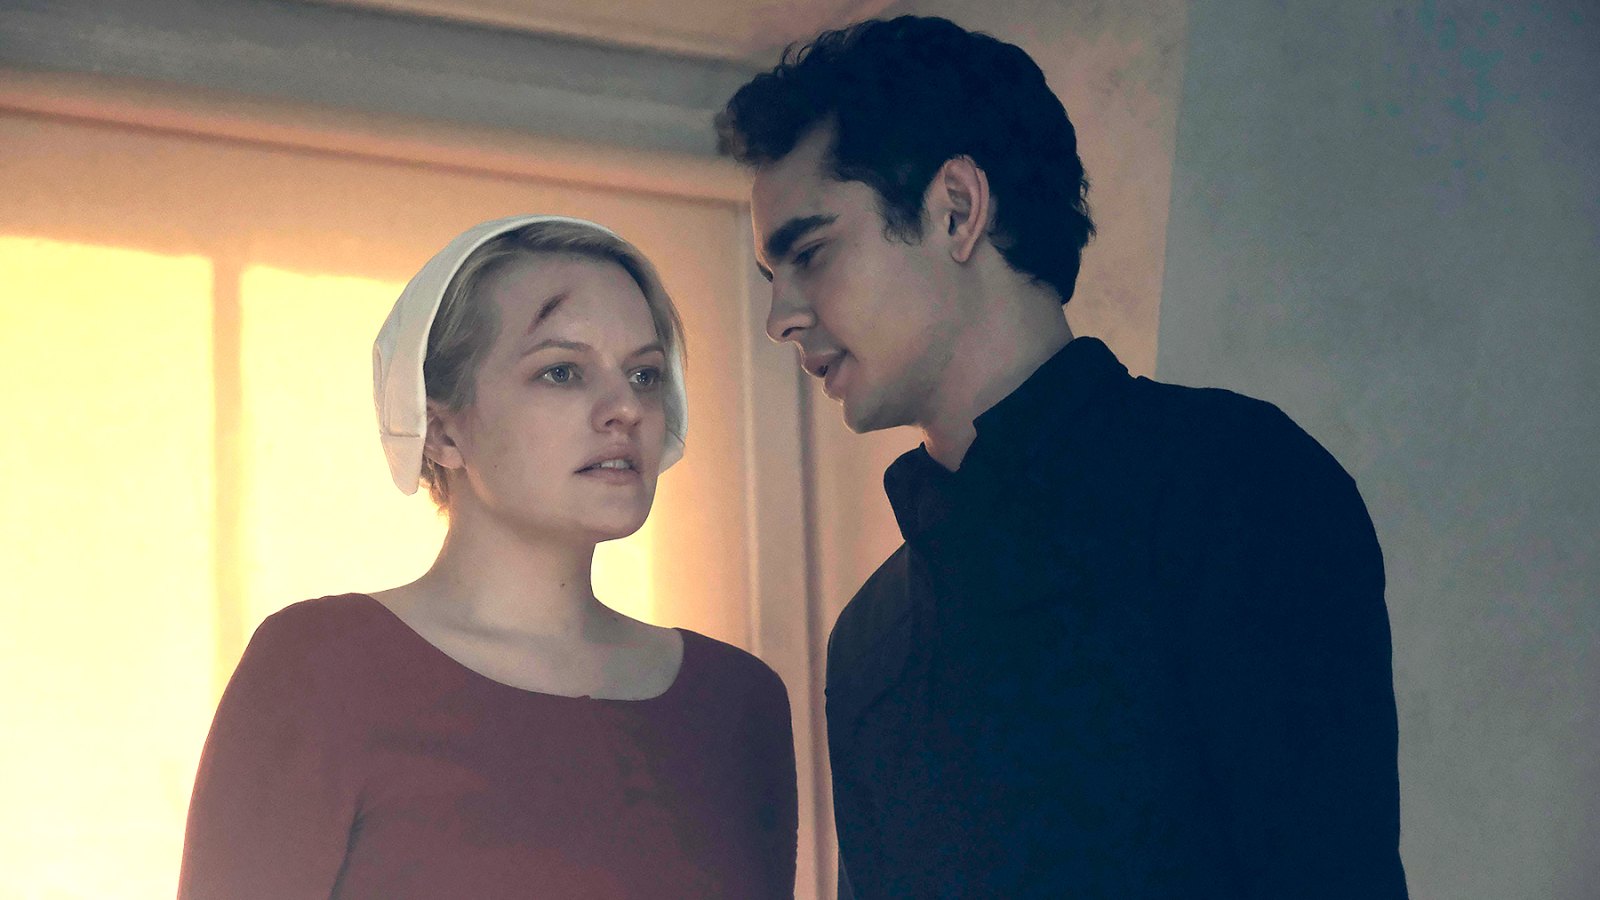 handmaids-tale-nick-and-offred